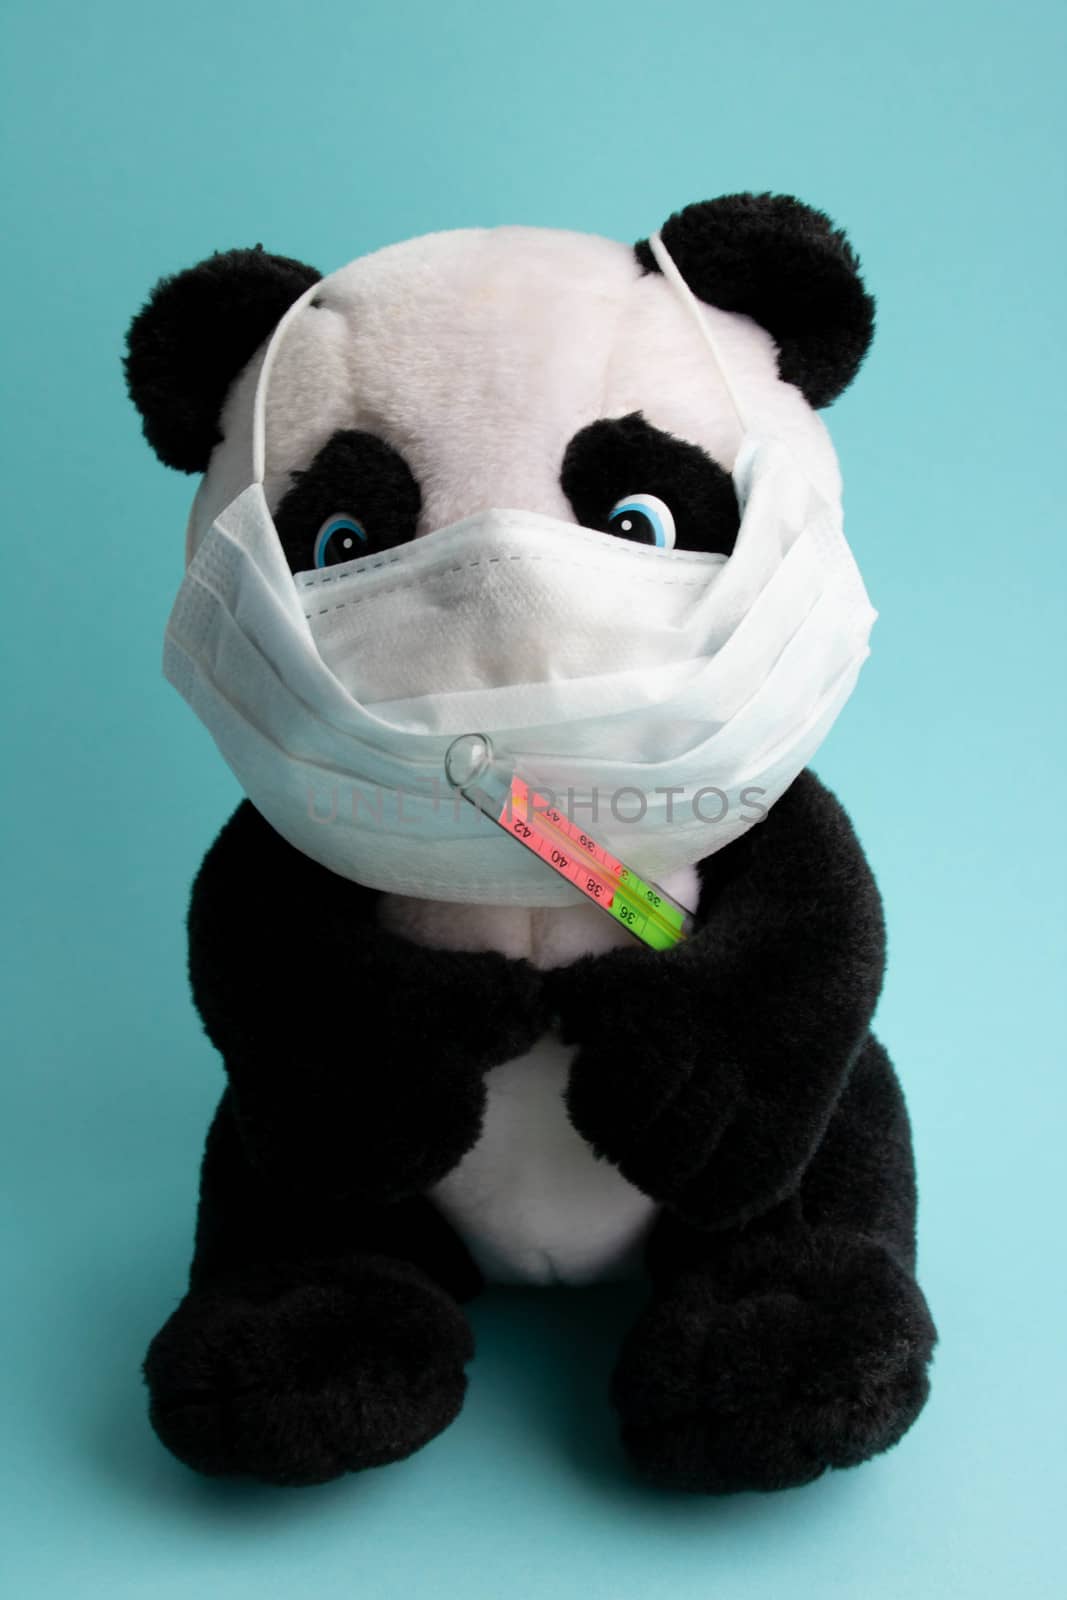 A toy panda in a medical mask with a thermometer sits on blue background. Coronavirus treatment concept.